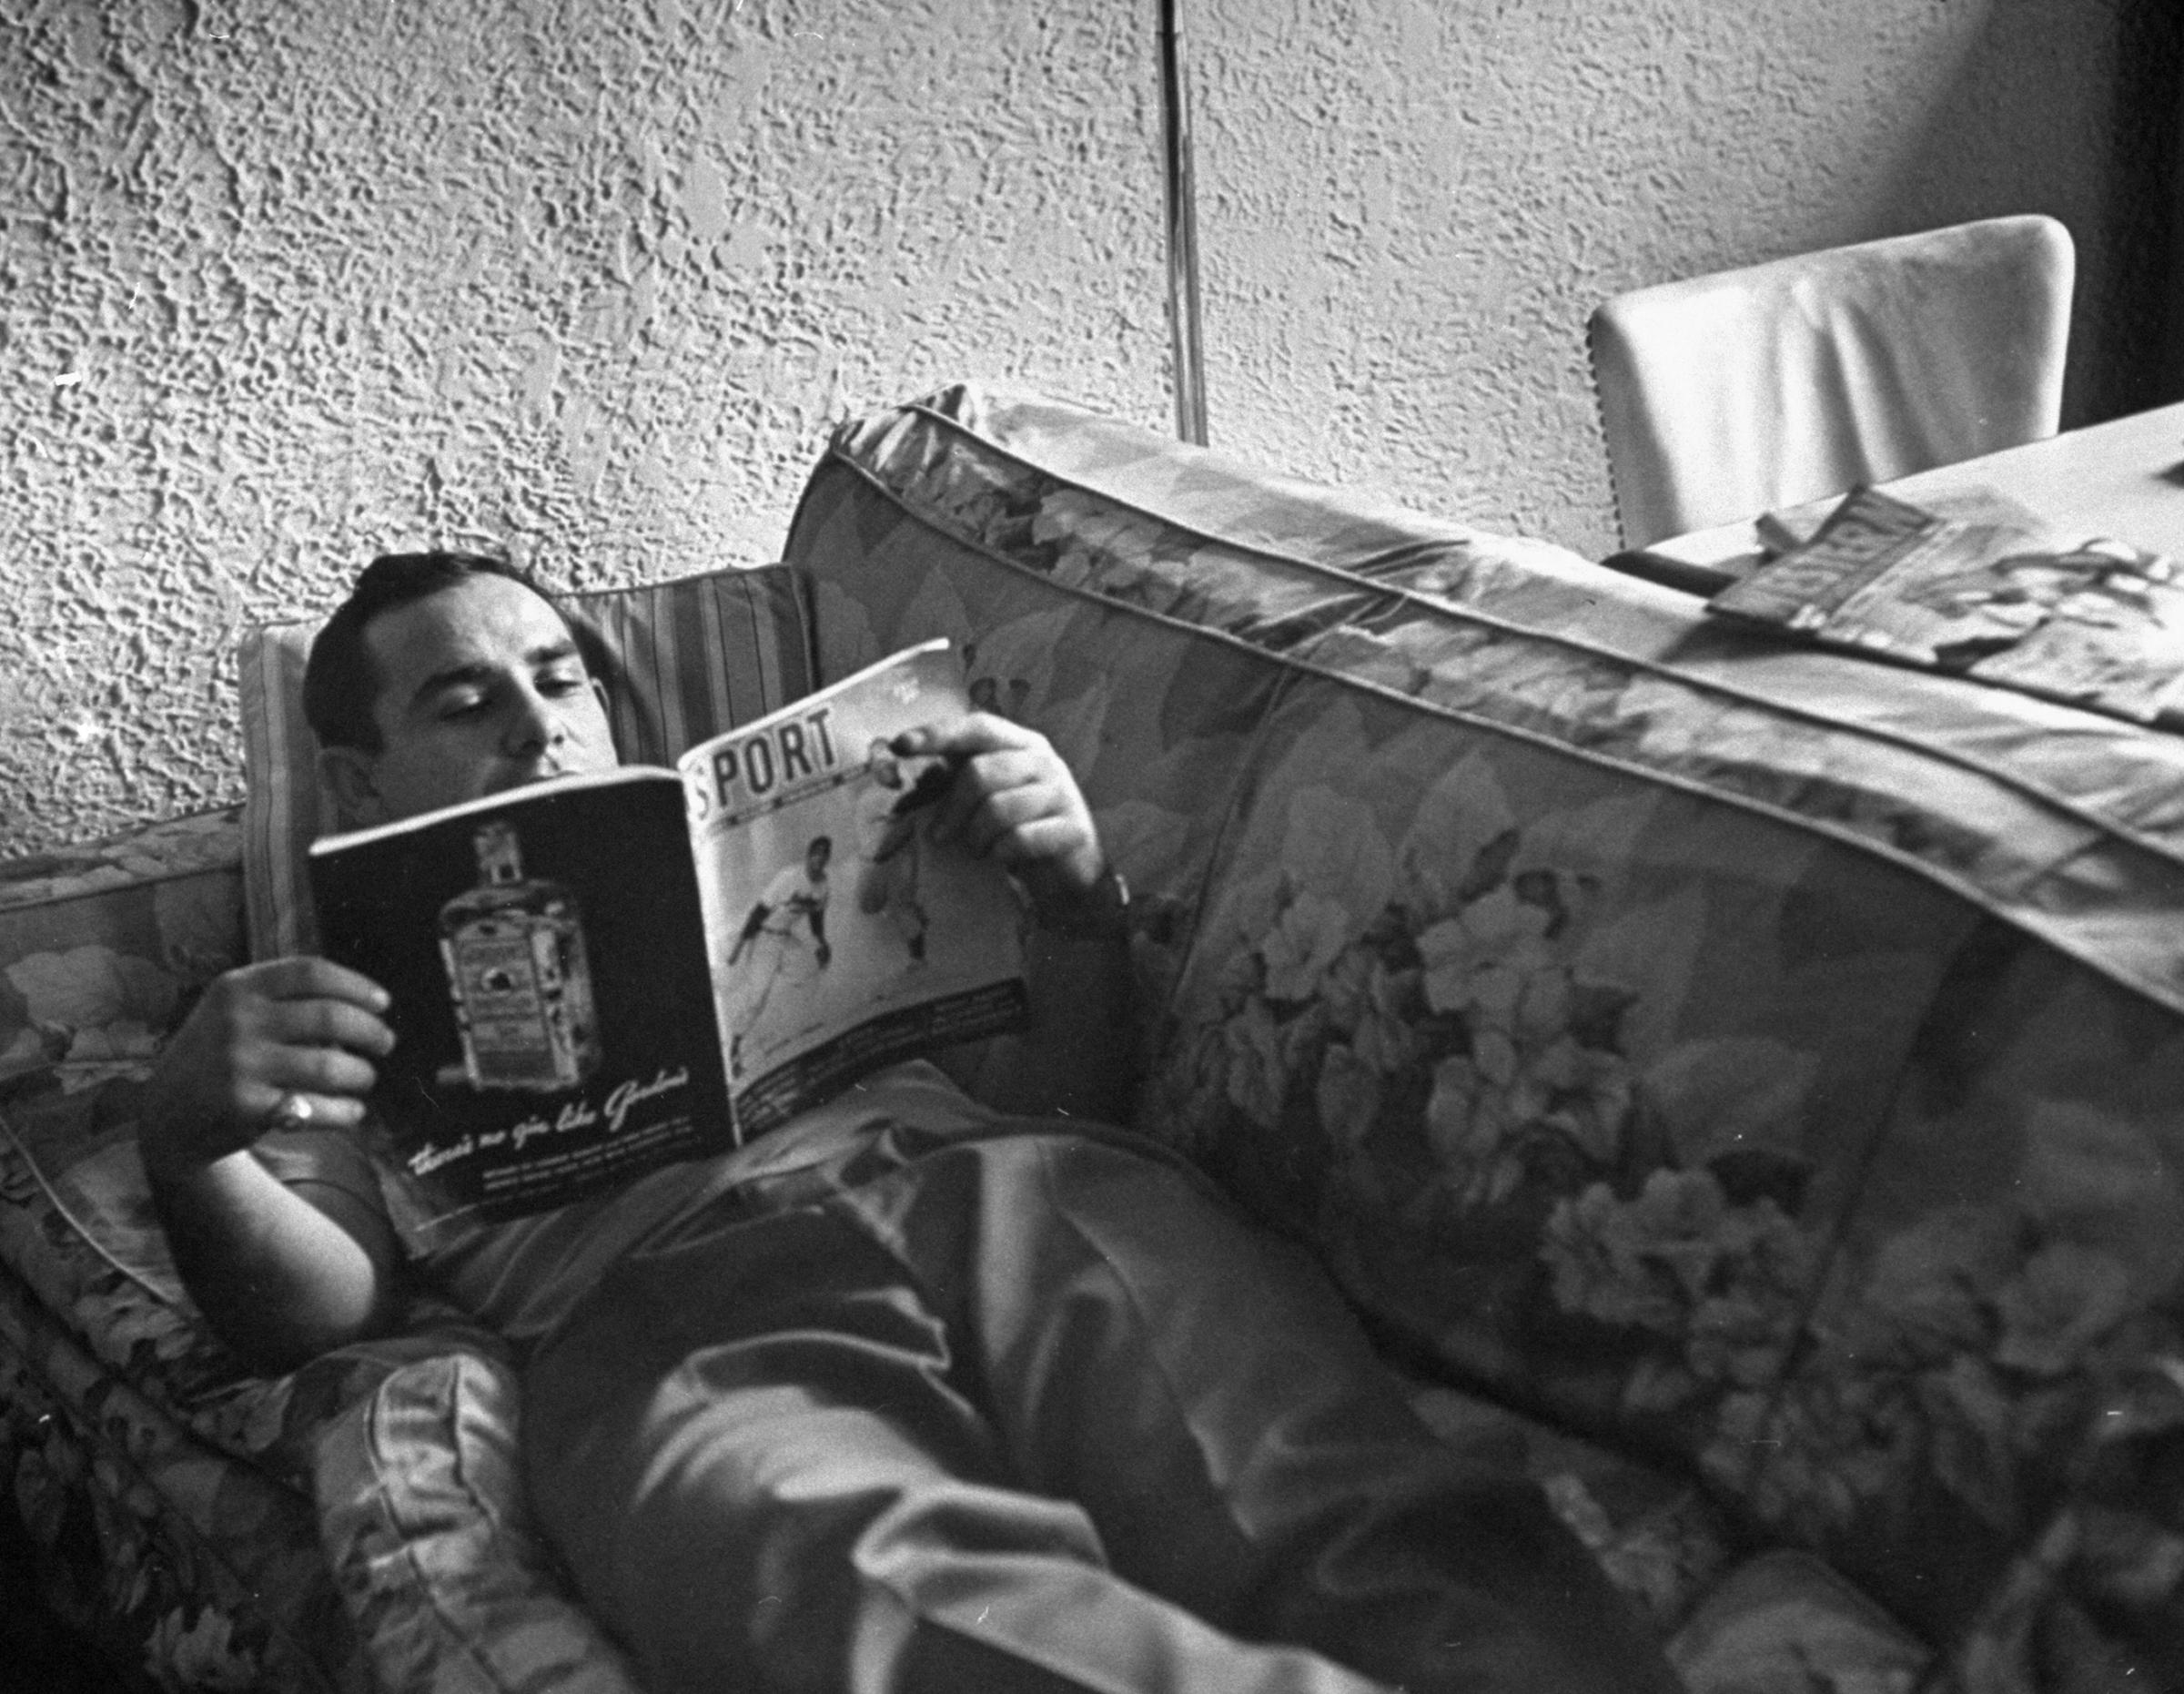 Yogi relaxes with type of reading he likes next best to comic books. He once asked a teammate studying a medical textbook, "How did it come out?"